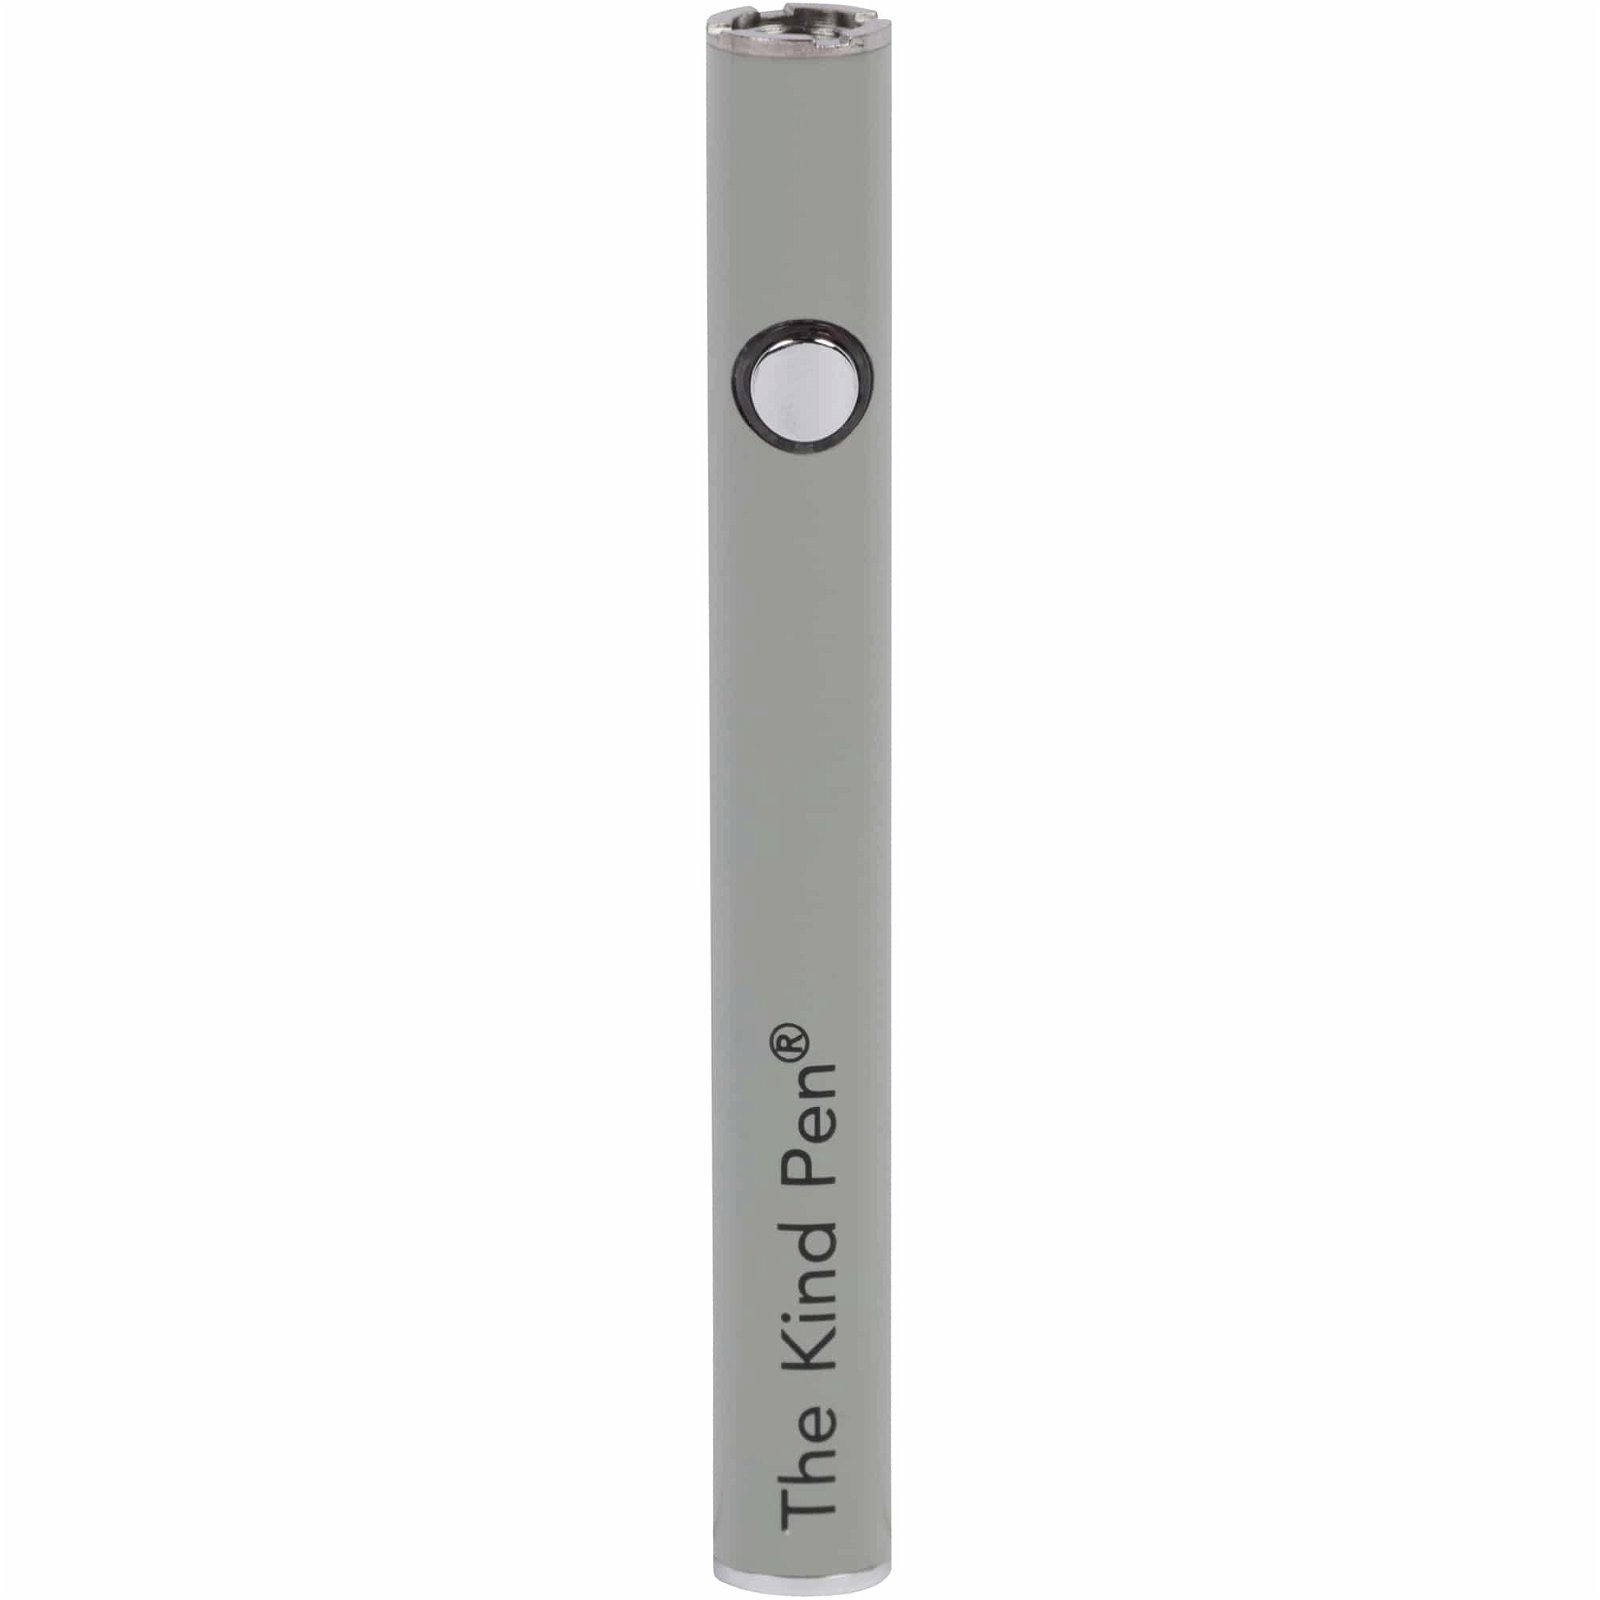 510 VV Vape Battery with USB Charger